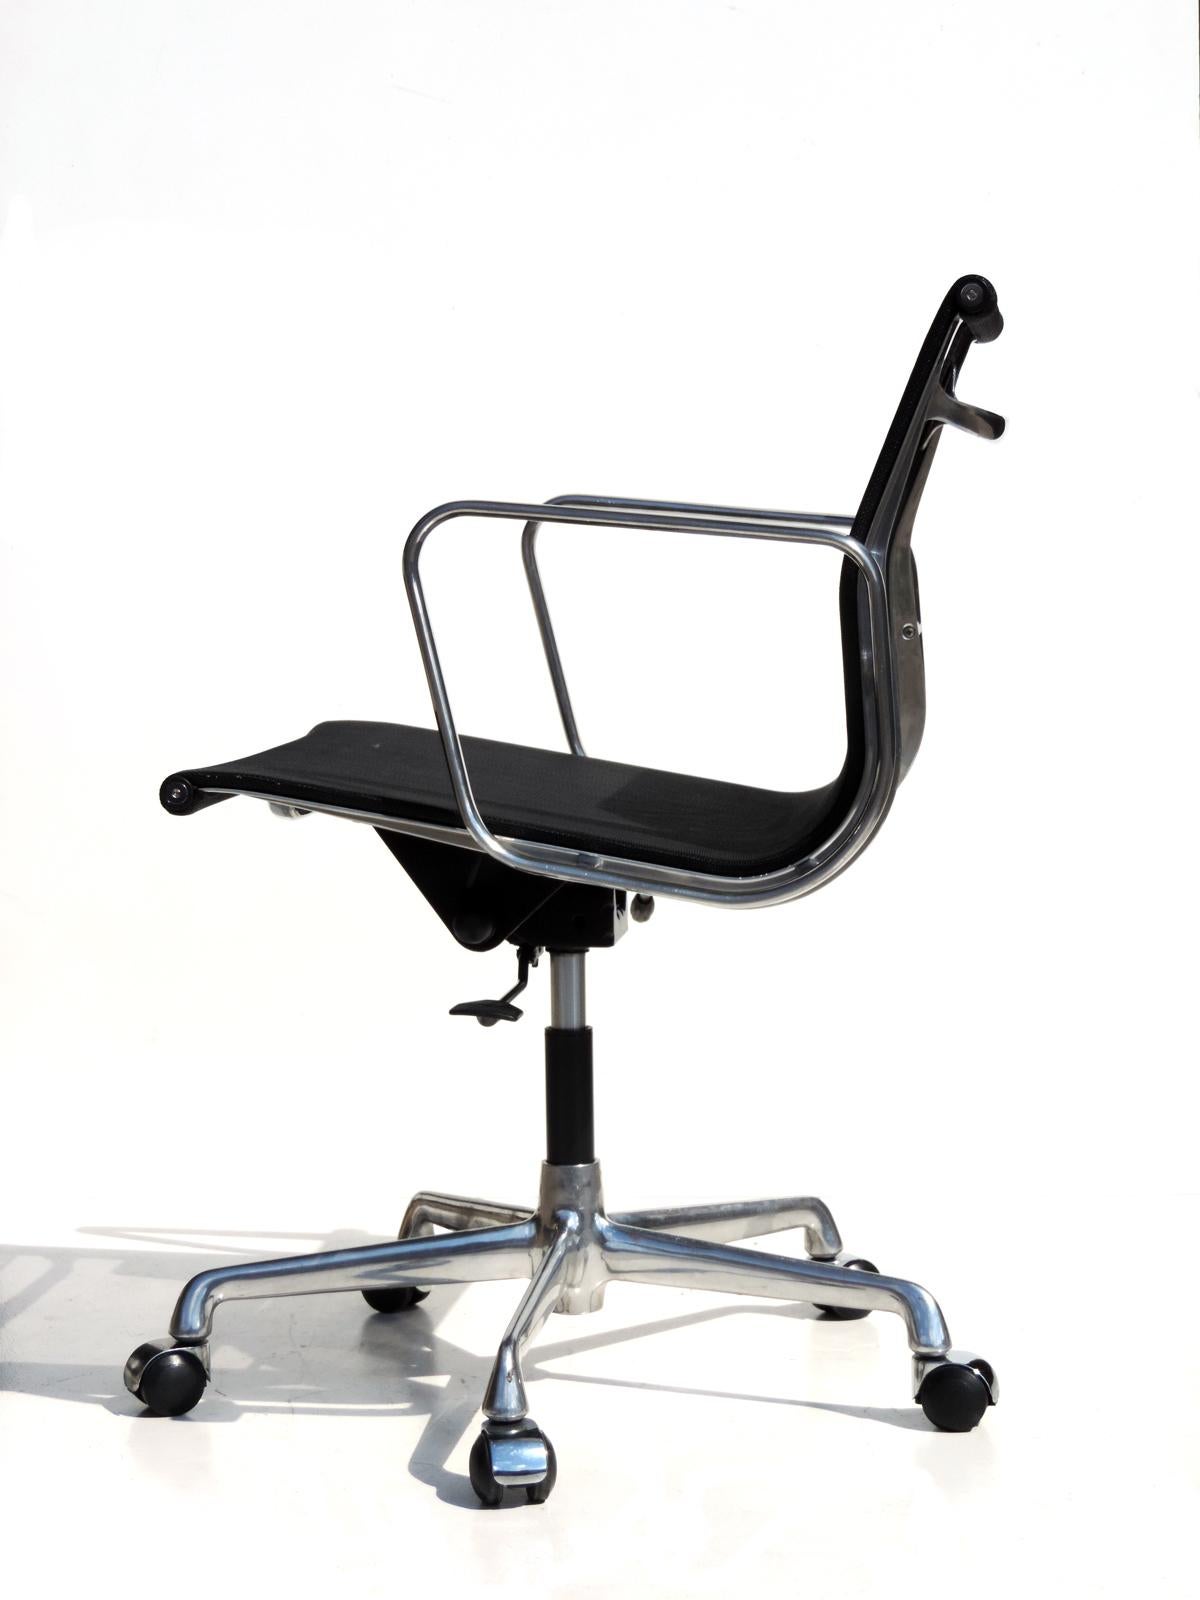 Chrome aluminum frame
Black netweave seat
Adjustable and reclining seat
Excellent condition.